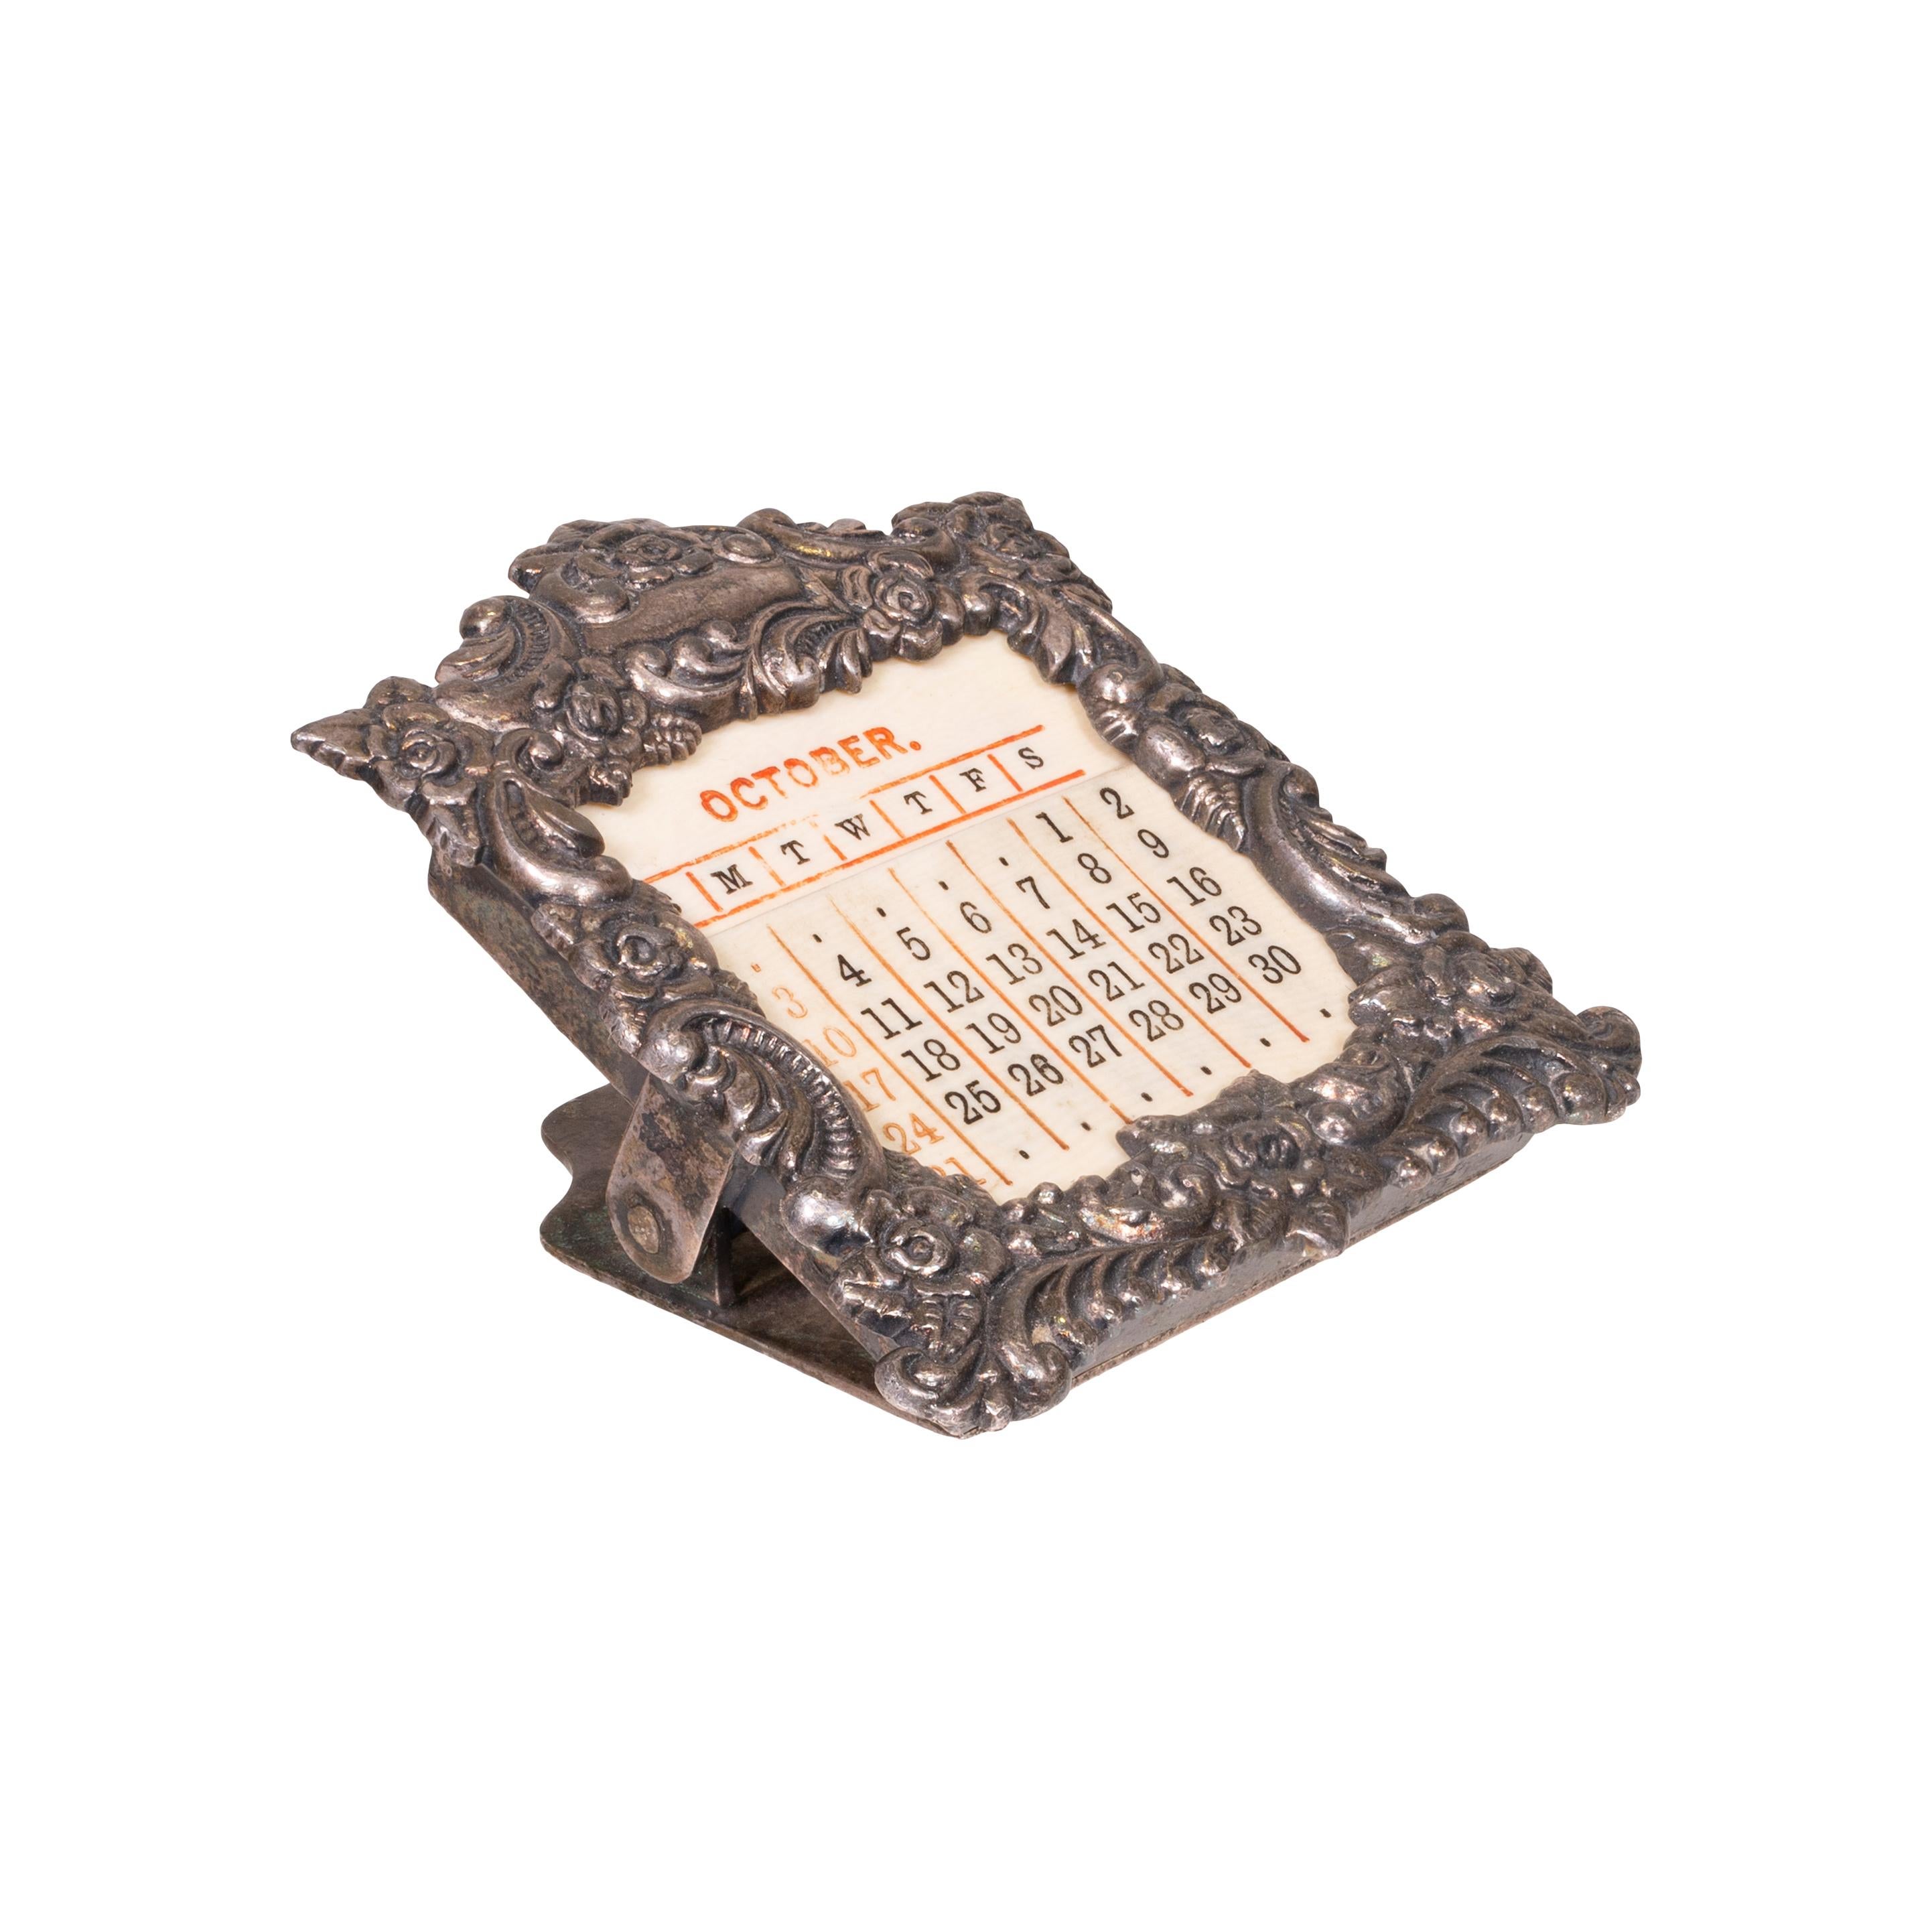 Small, pocket sized ornate silver plate Victorian perpetual calendar. Holder clip with ivory color celluloid cards that can be arranged for every month, every day, every year. Made by Baldwin & Gleason co. ltd, New York. Copyright 1893. Rare and